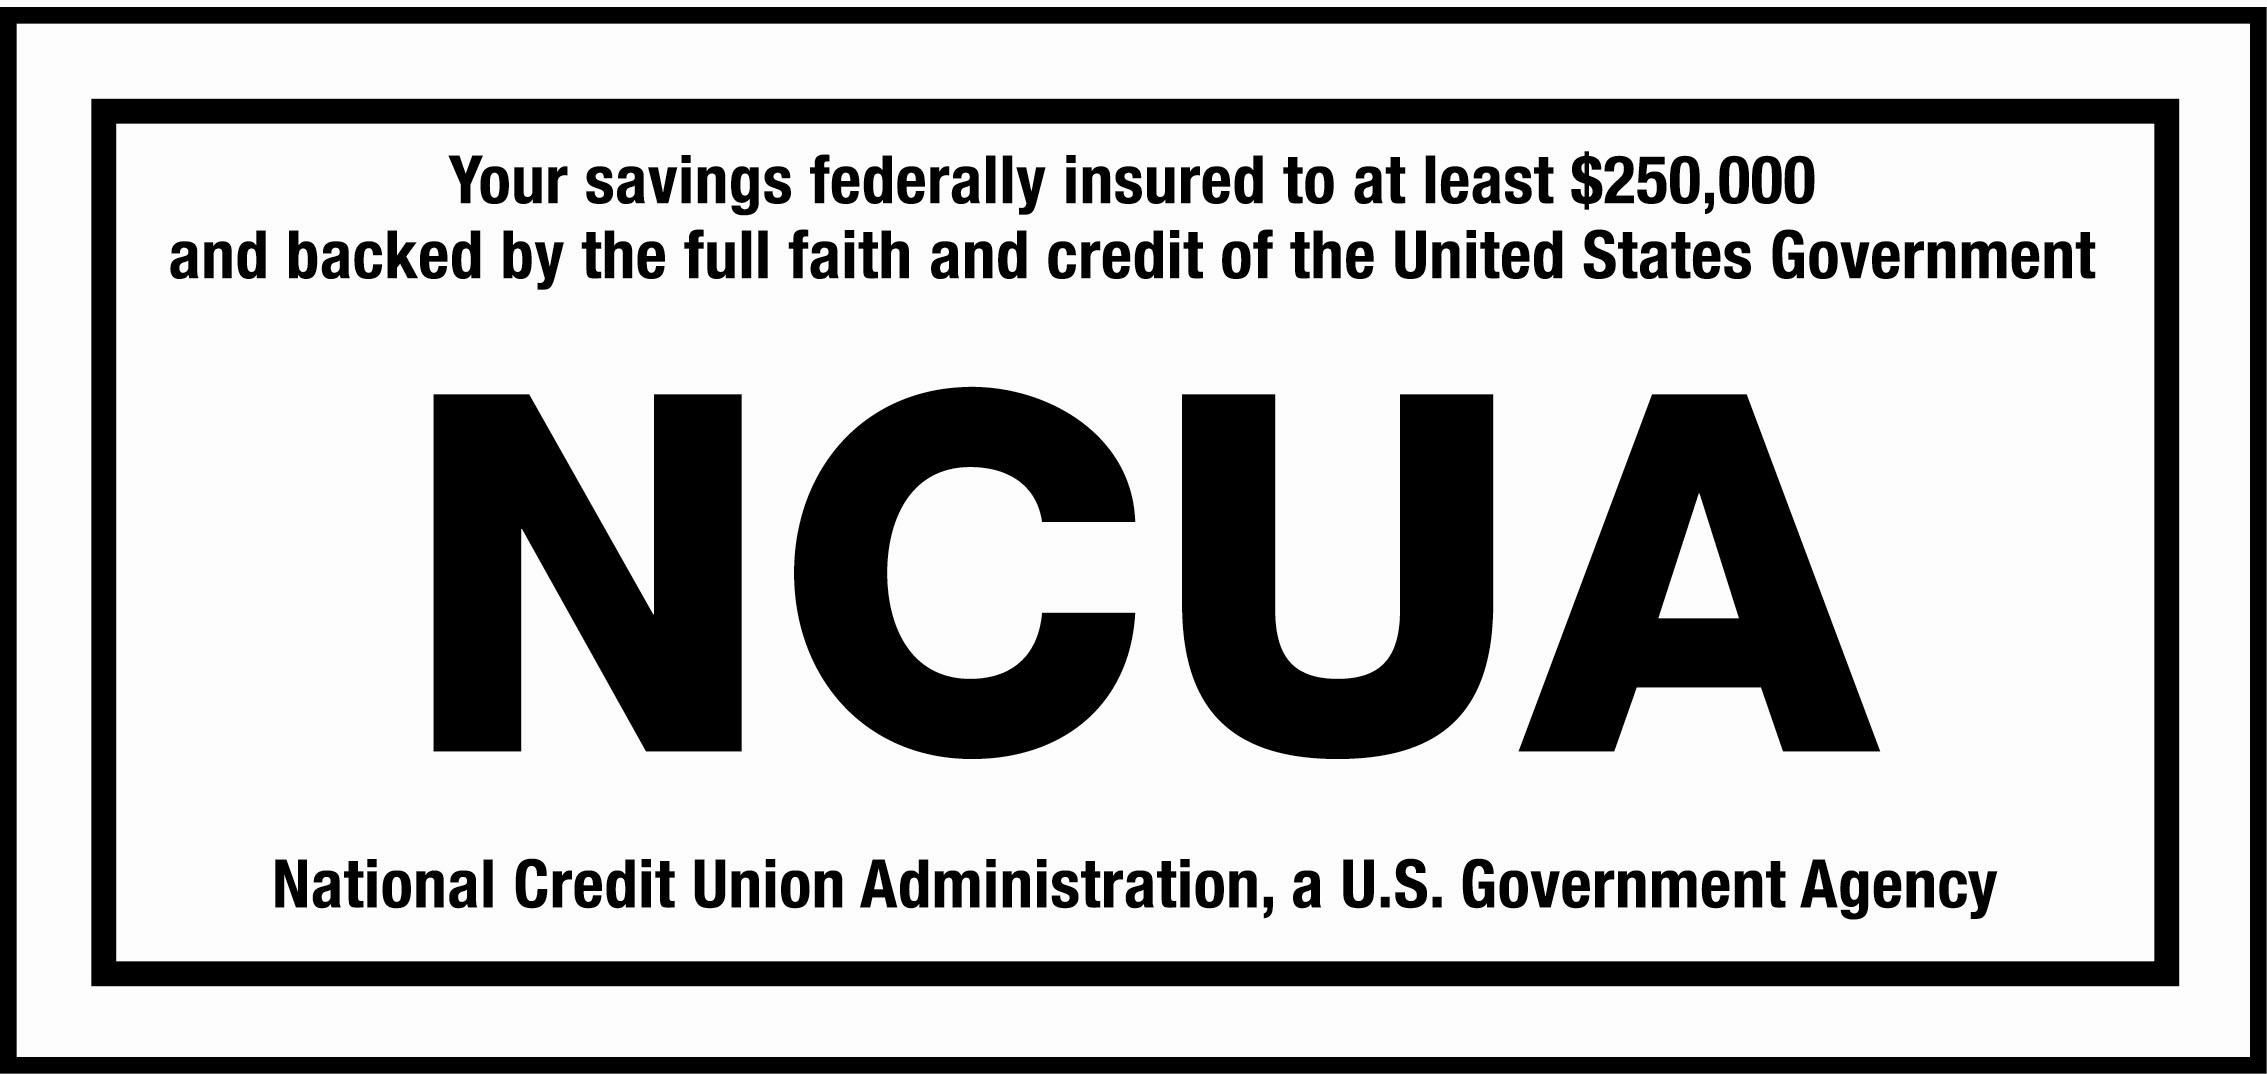 National Credit Union Administration, a U.S. Government Agency. Your savings federally insured to at least $250,000 and backed by the full faith and credit of the United States Government.